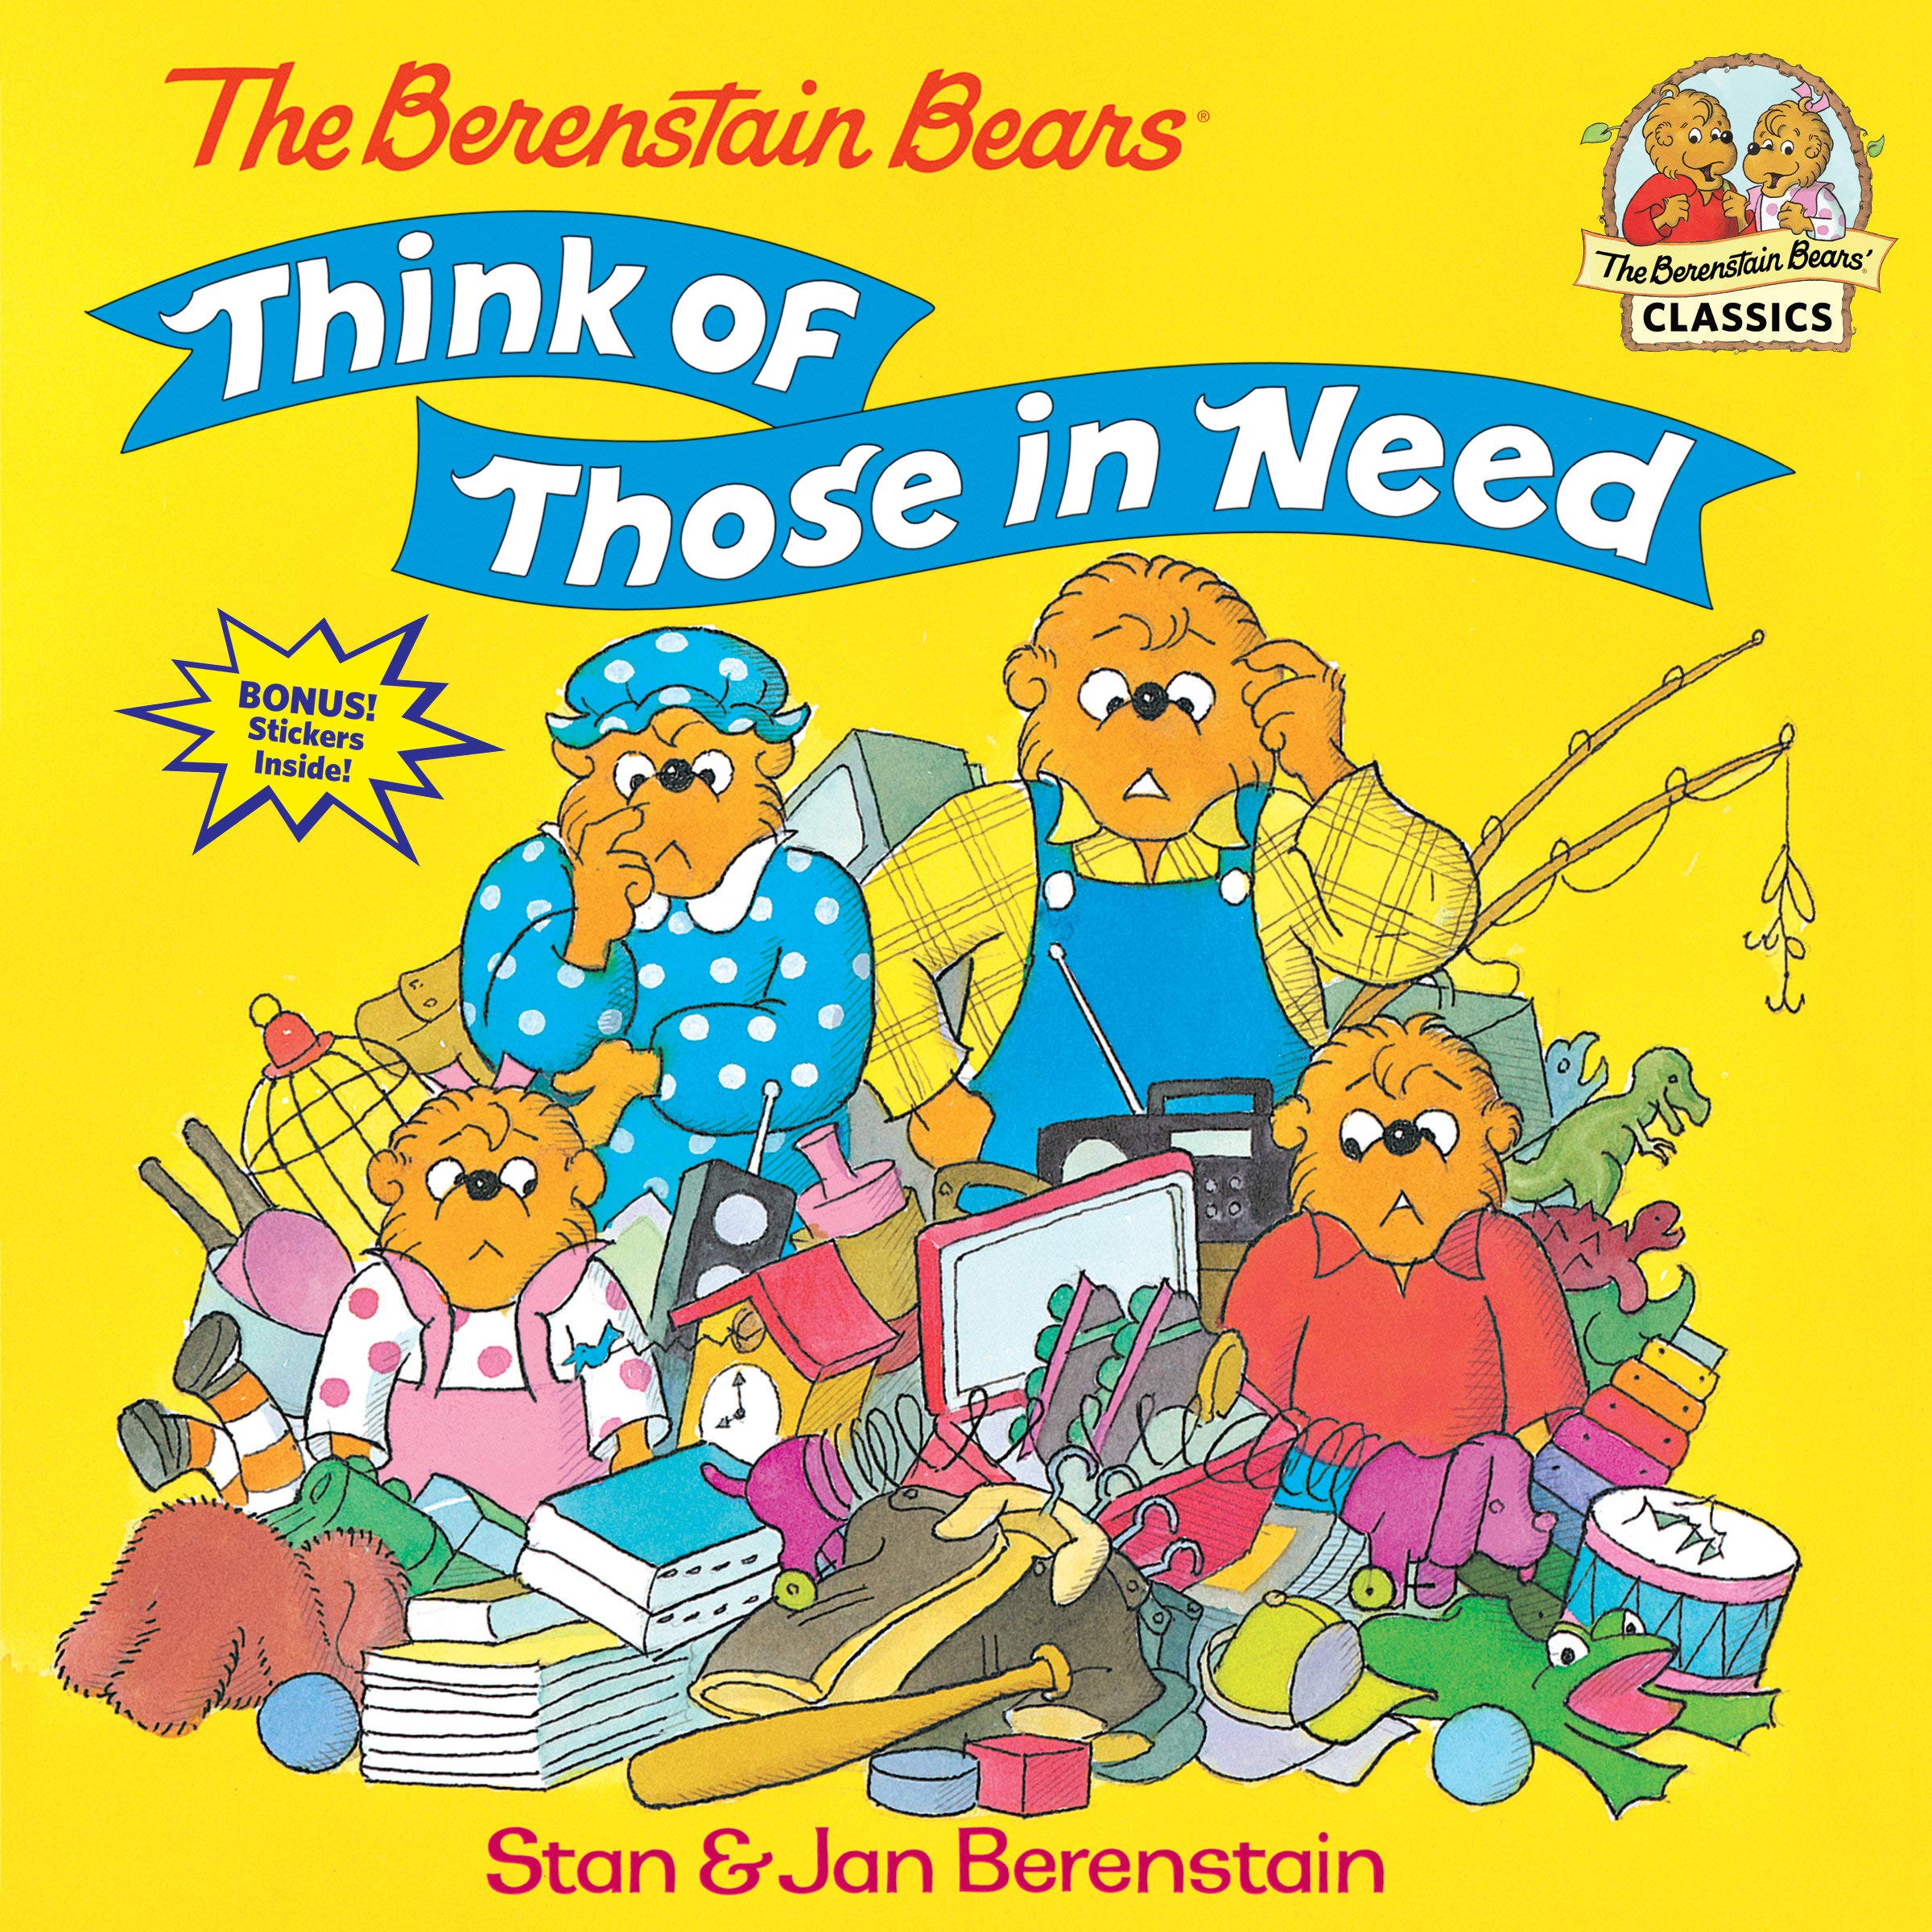 IMG : The Berenstain Bears Think of those in need